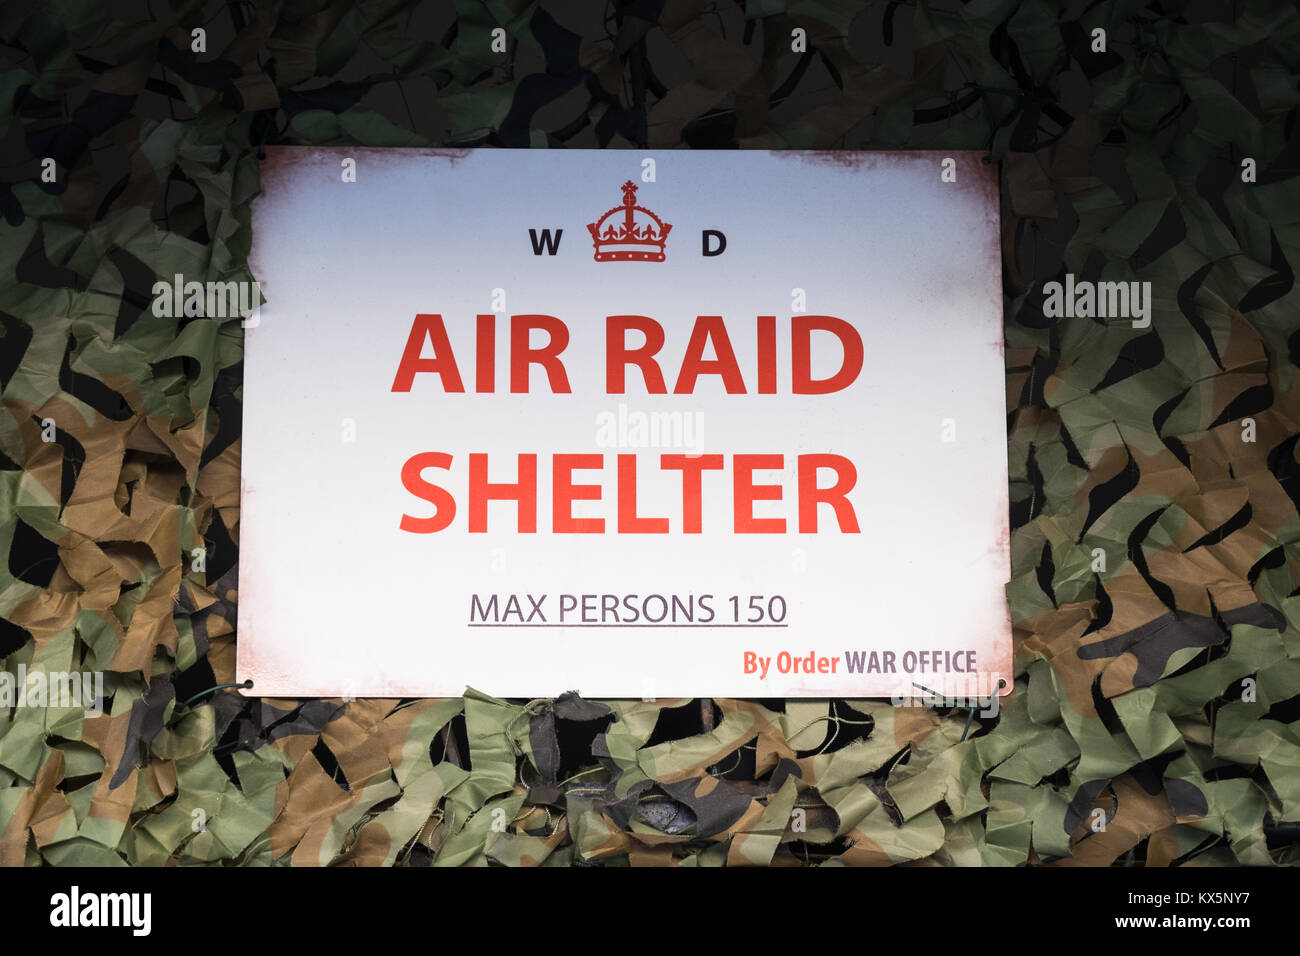 Air raid shelter sign issued by the War Office in World War Two. Leyburn North Yorkshire England 6.1.18 Stock Photo